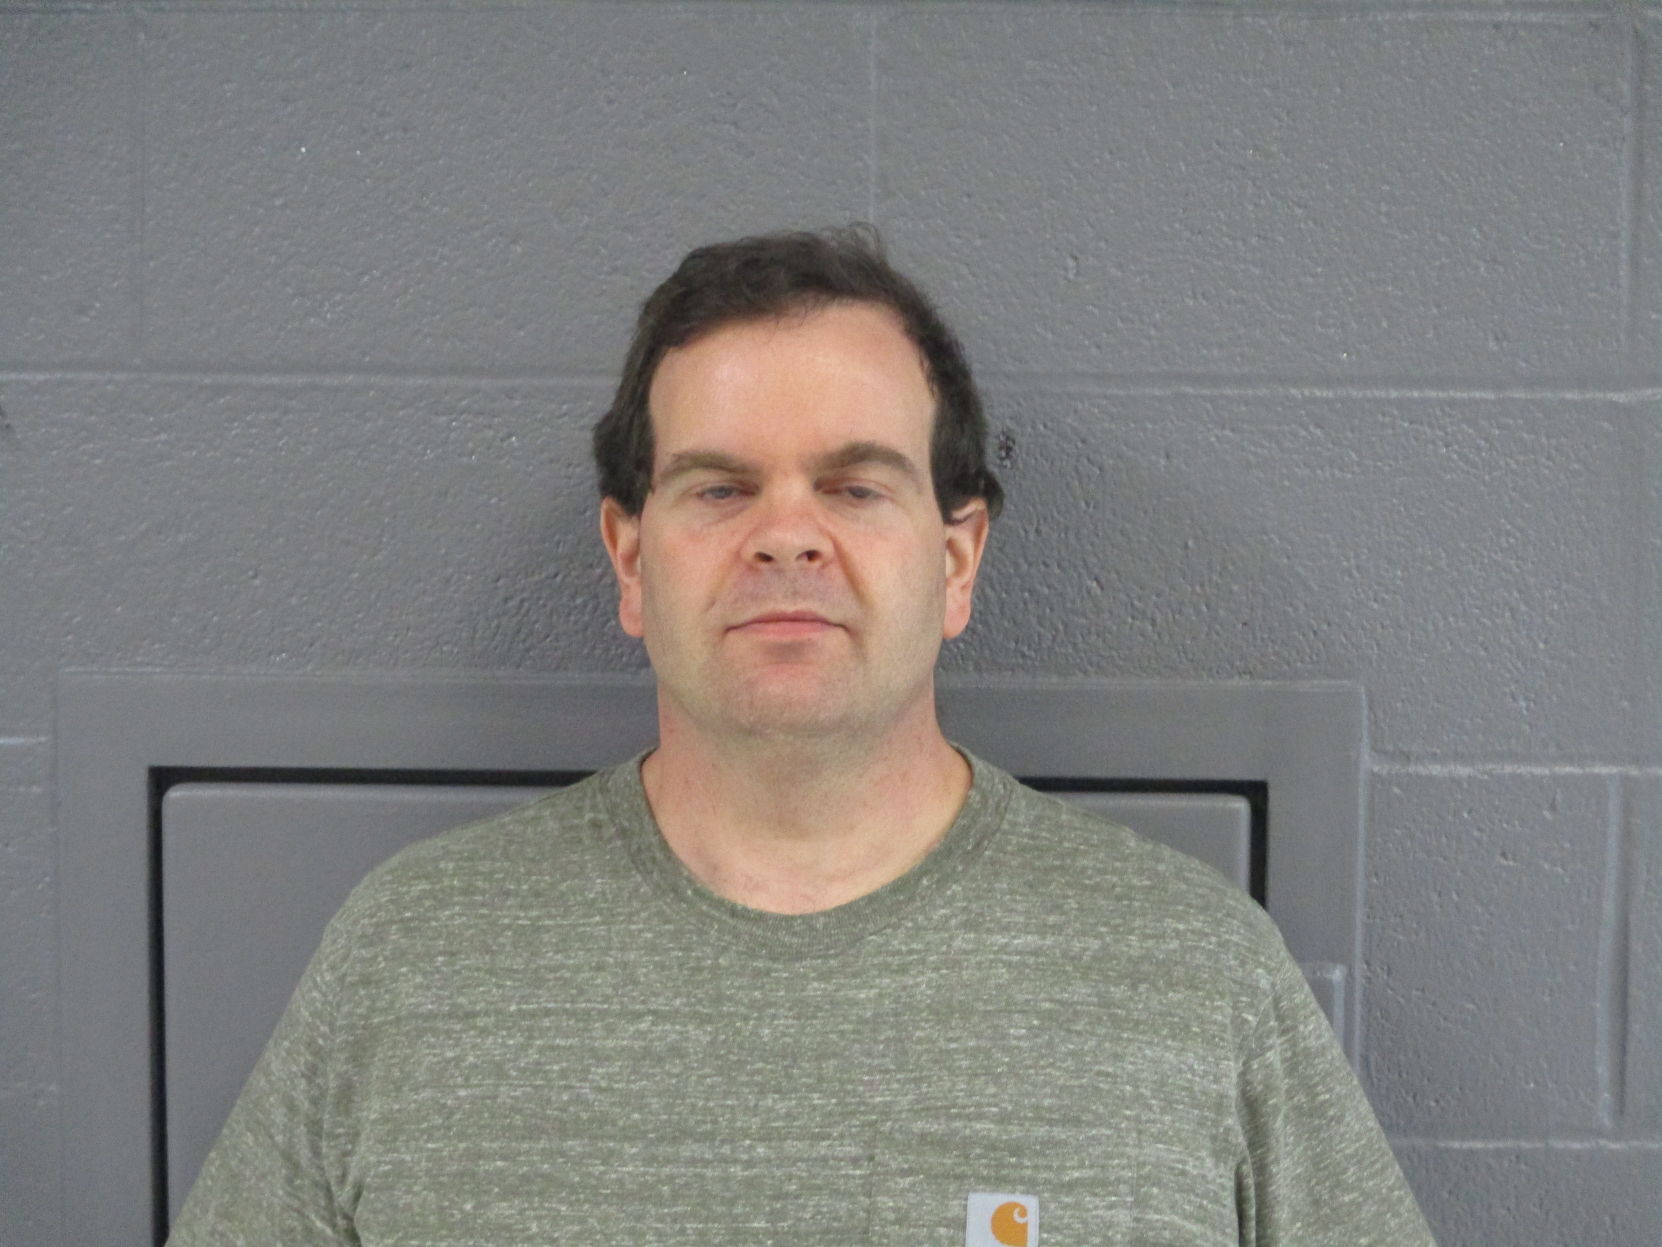 Bruceton Mills man charged with more than 300 counts of soliciting minors Preston County News wvnews pic